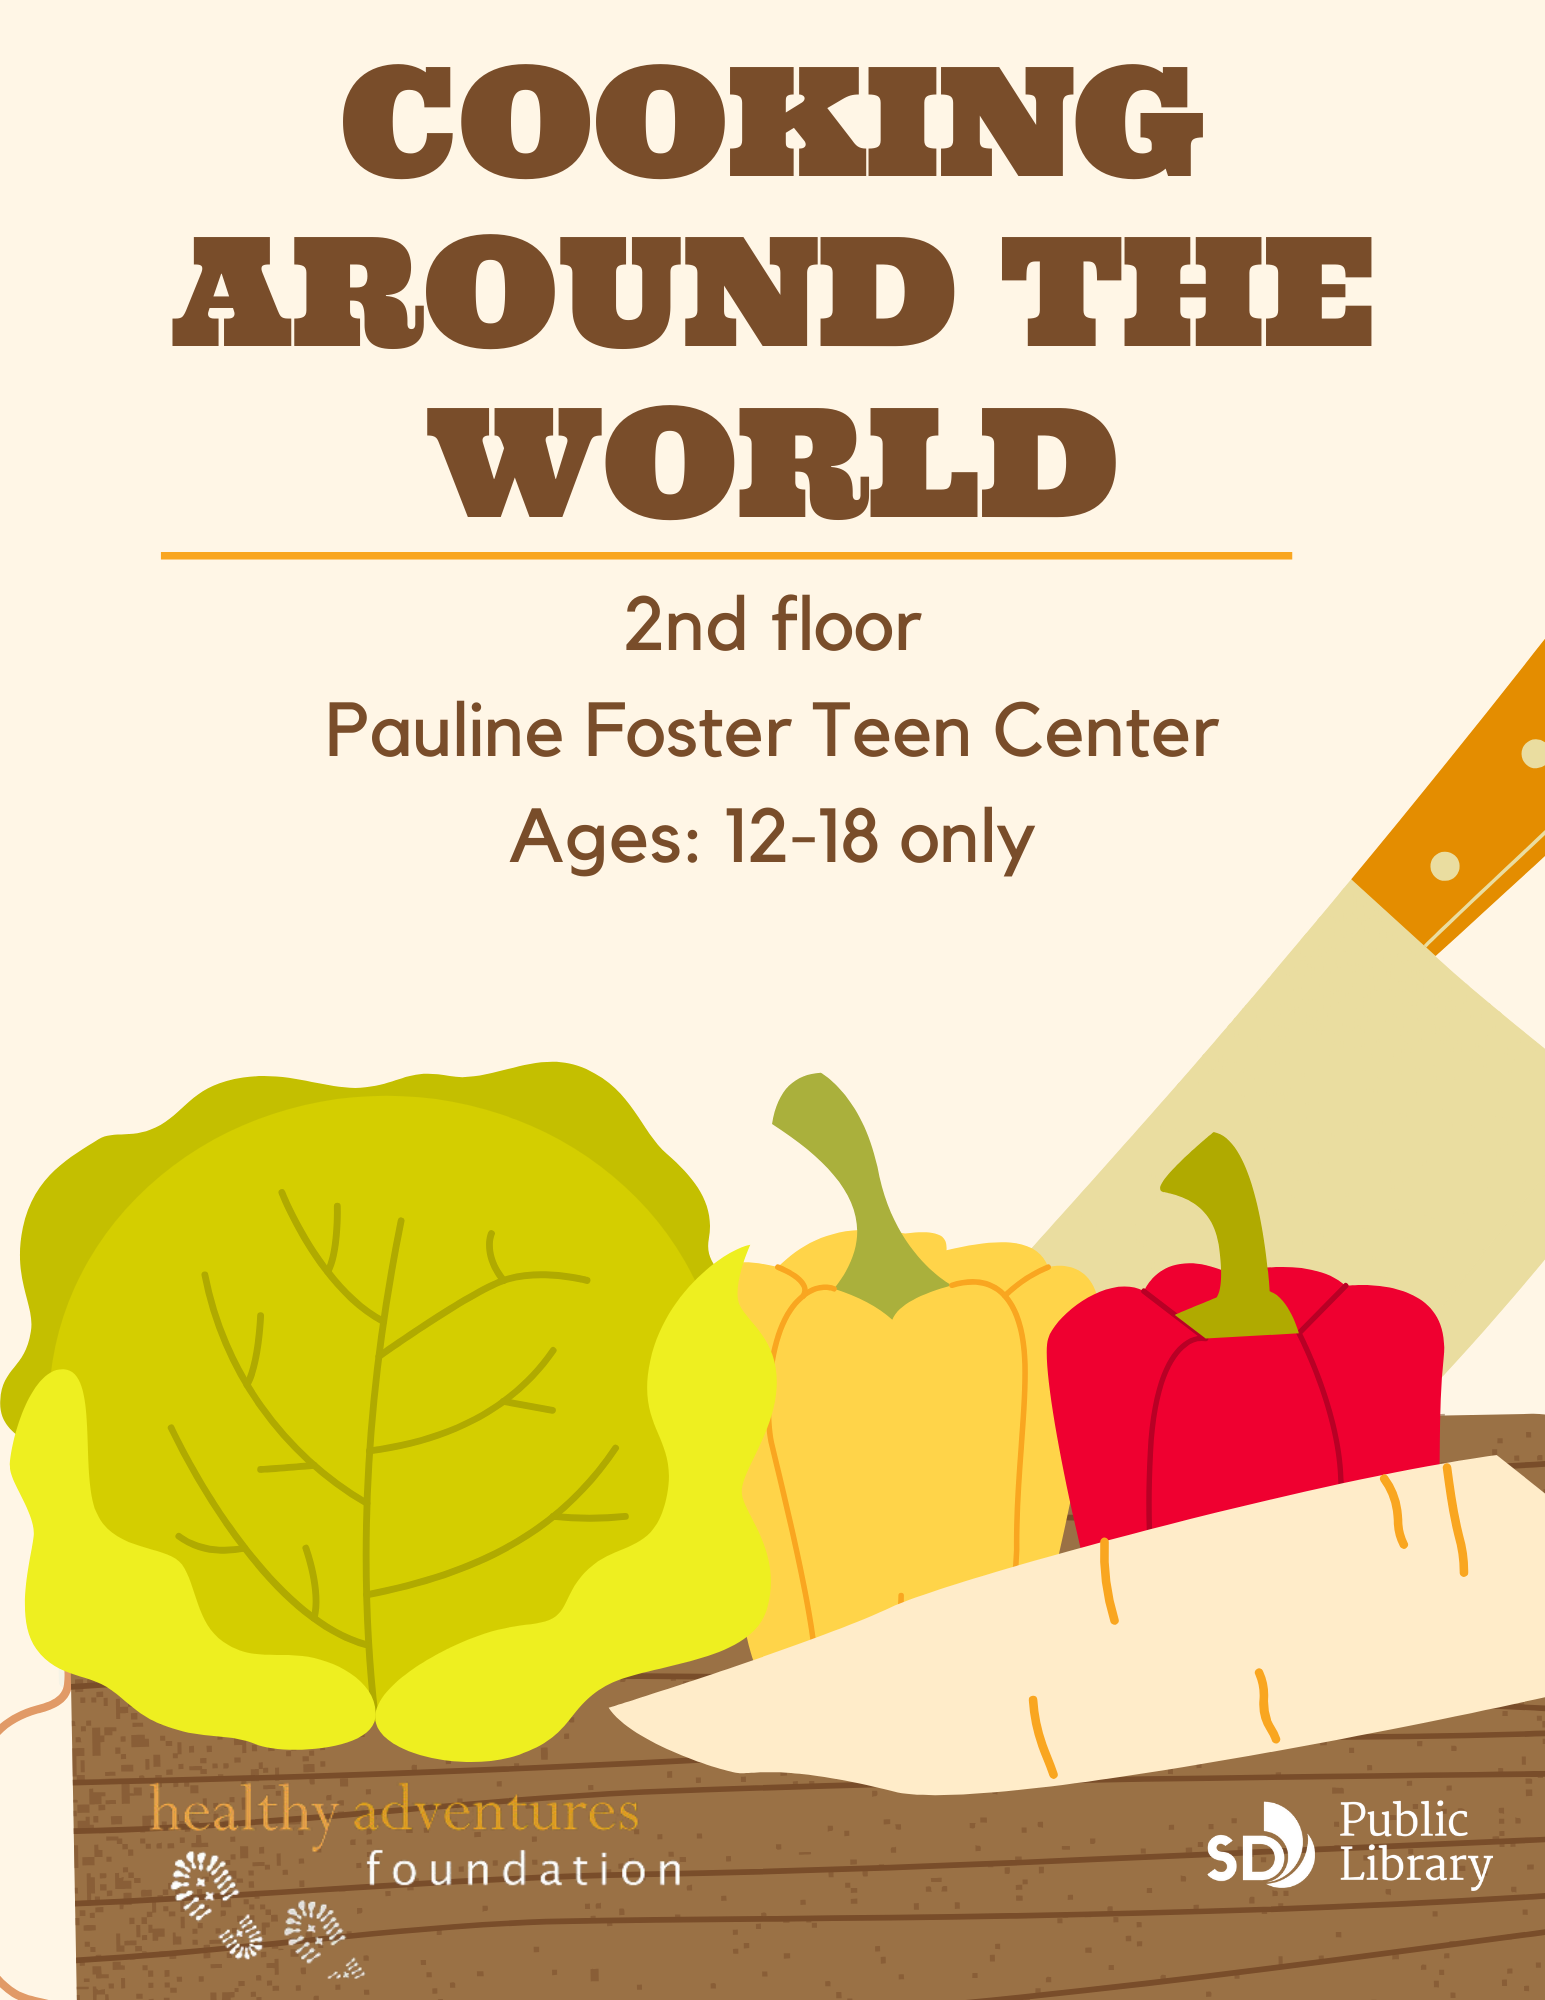 Cooking Around the World. 2nd floor, Pauline Foster Teen Center, Ages 12-18